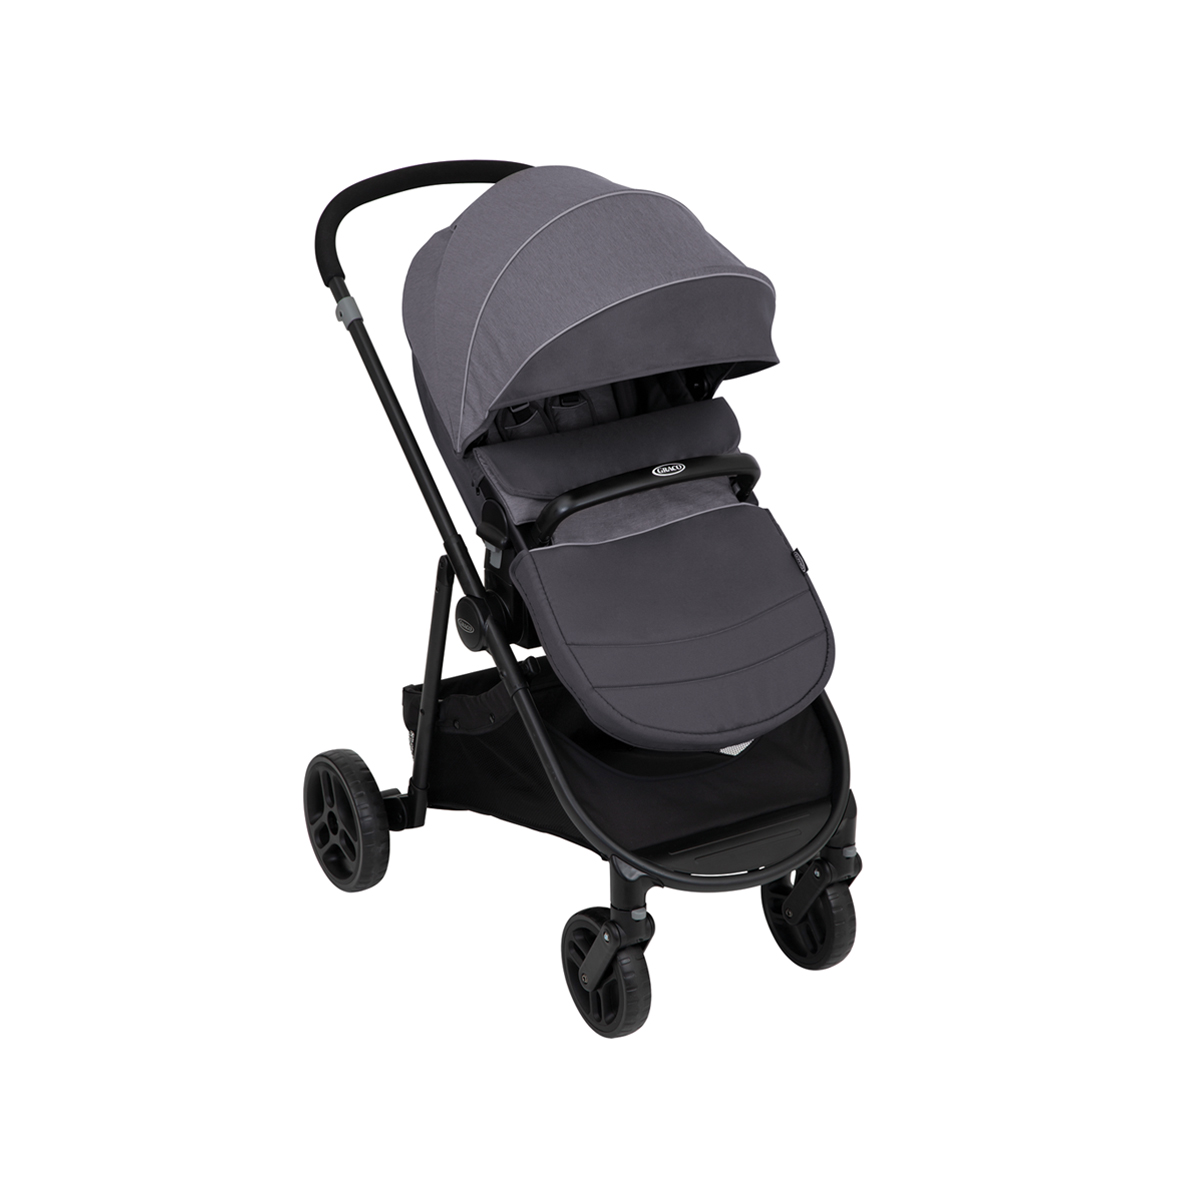 Graco Transform™ in pushchair mode with apron three quarter angle